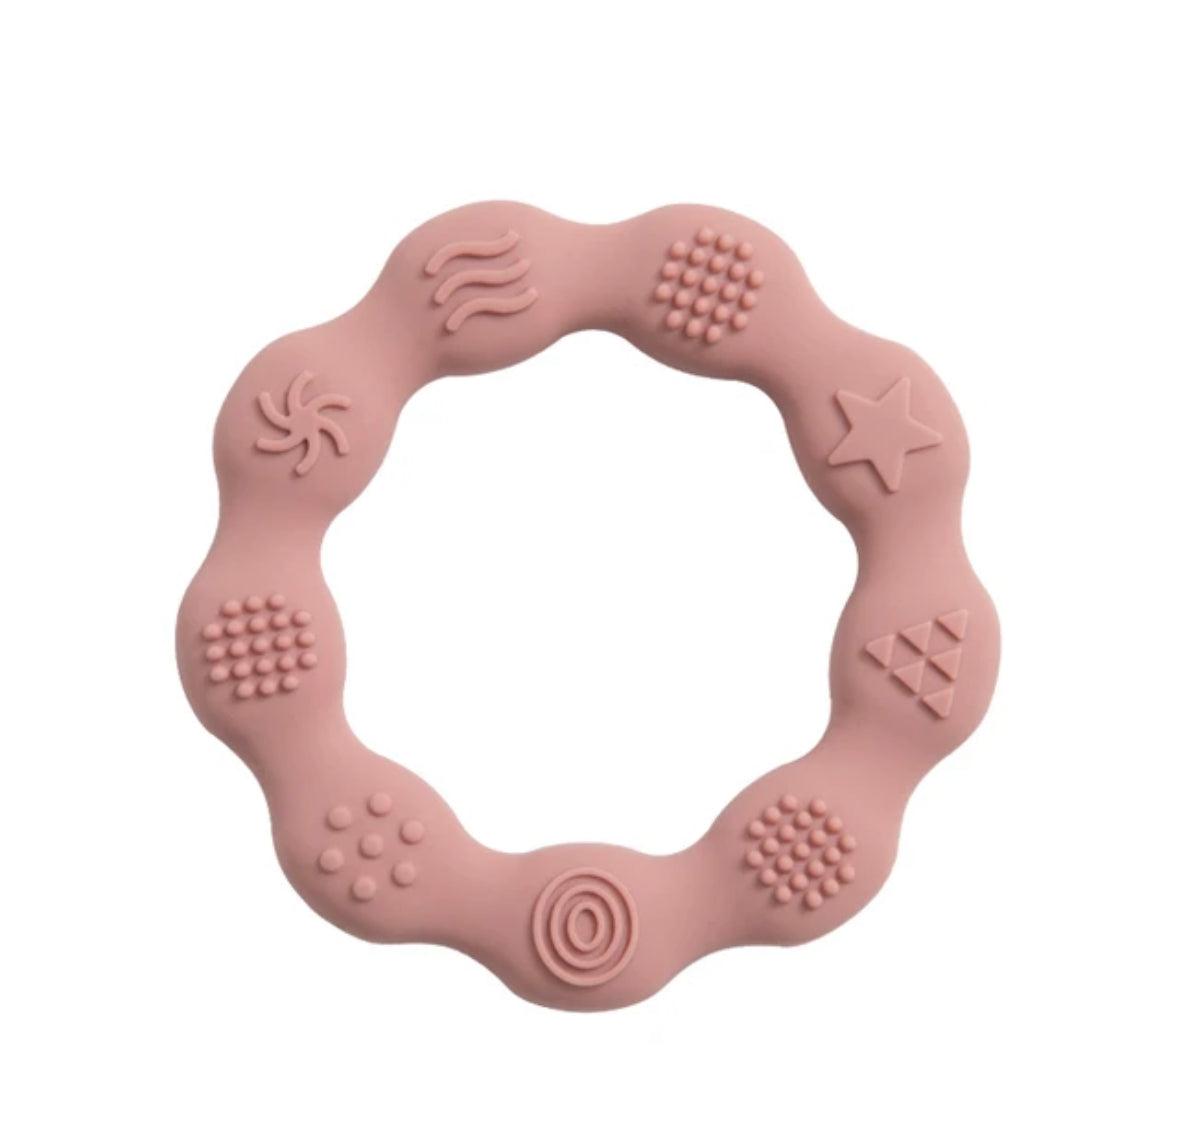 Mon Amour Silicone Teether Ring - Mauve